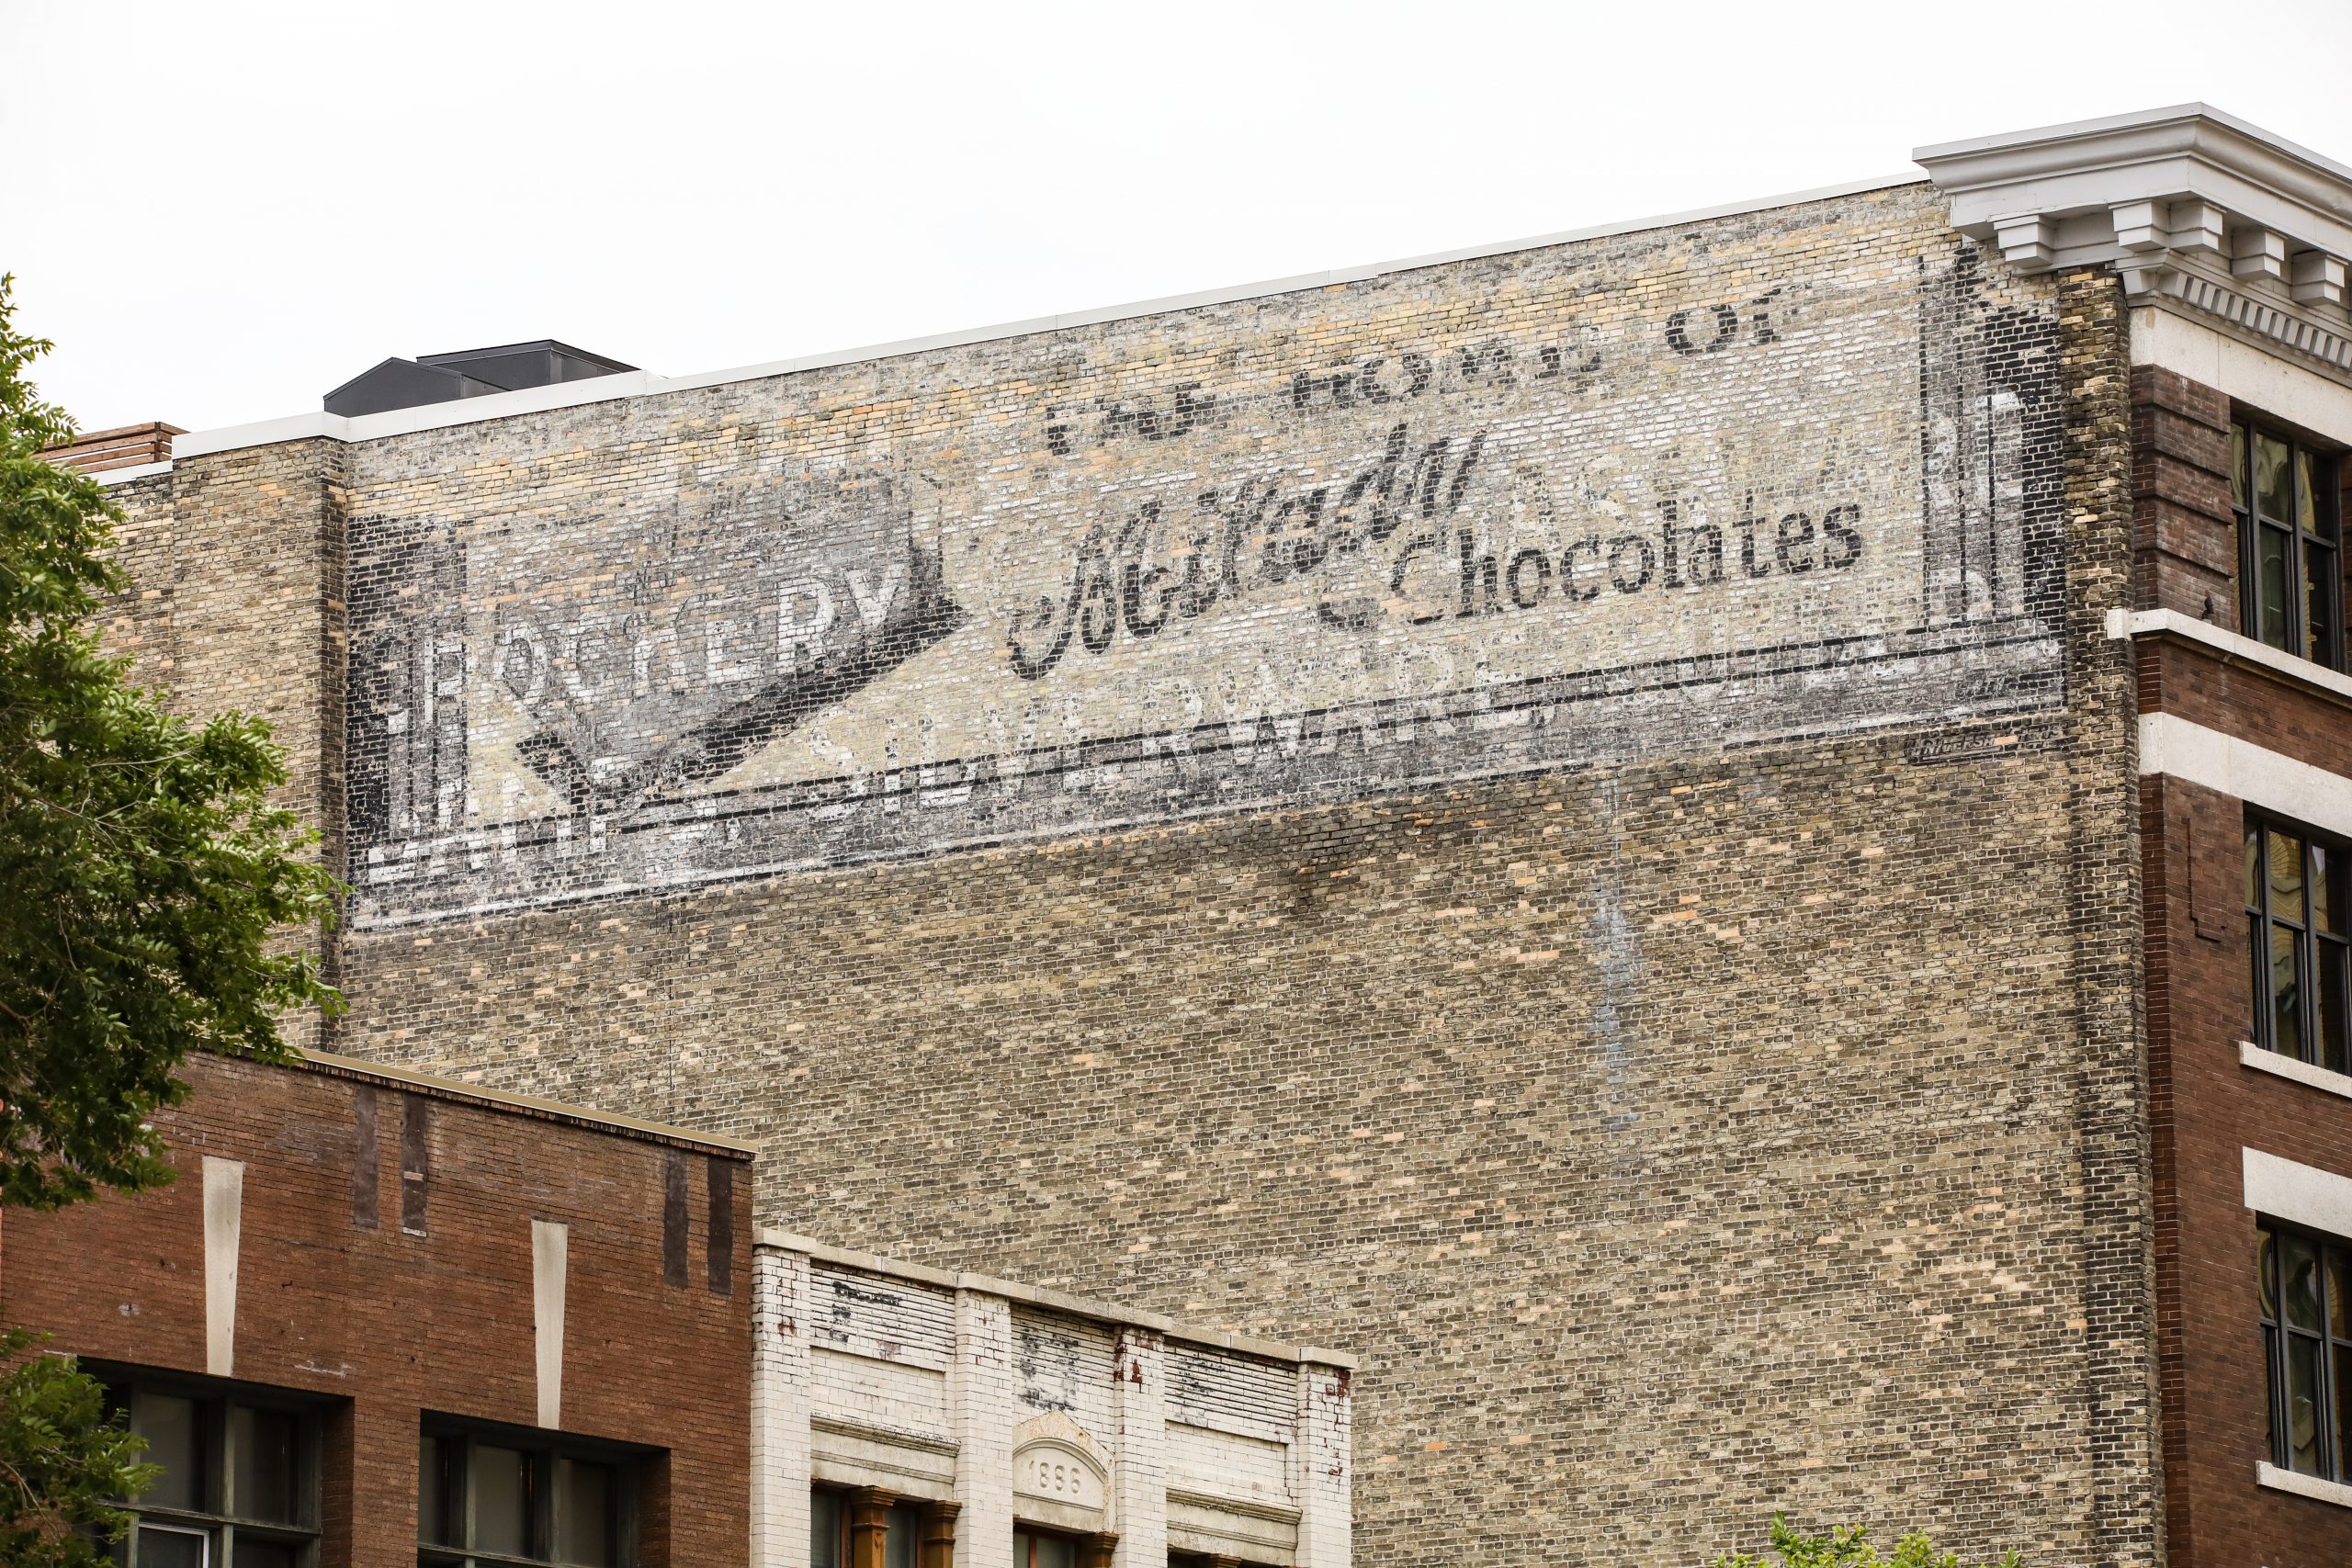 Image of Milady Chocolates Ghost Sign at 165 McDermot Street